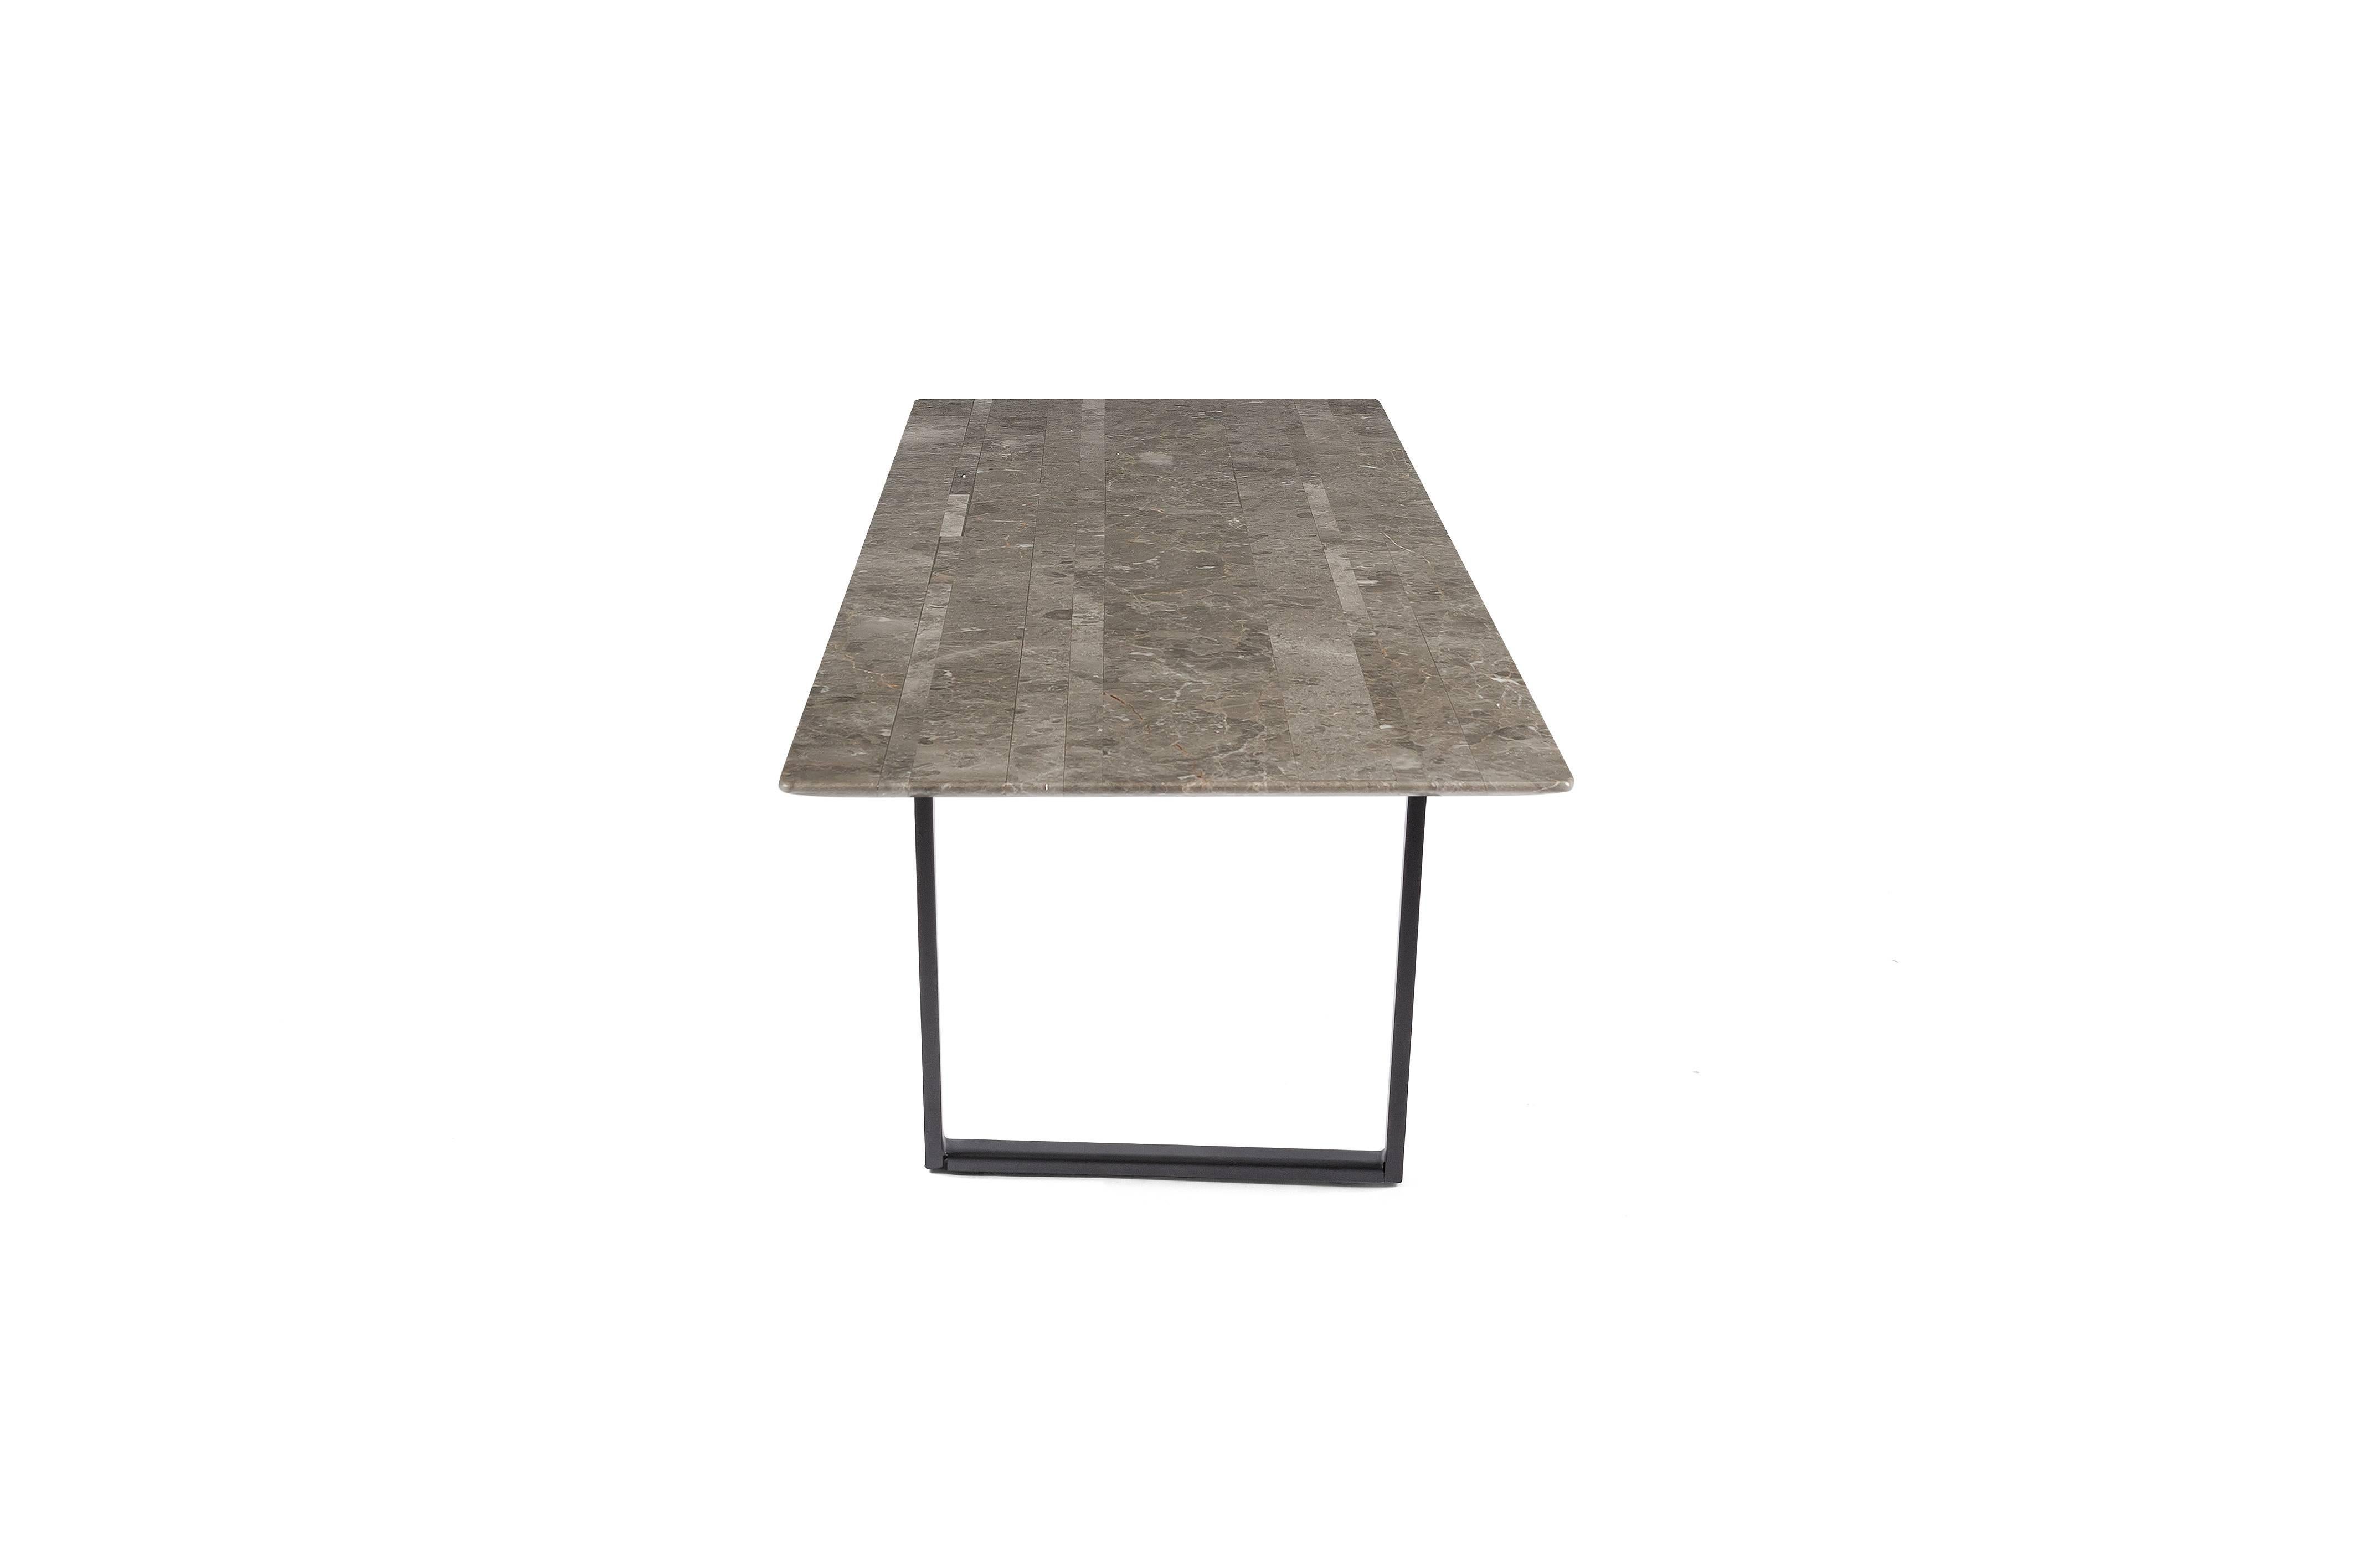 Designed by Piero Lissoni exclusively for Salvatori, Dritto combines elegant lines of Classic natural stone with a bold geometric frame crafted from iron. Its defining characteristic is the curved underside of the top, and its uber-fine edges of a